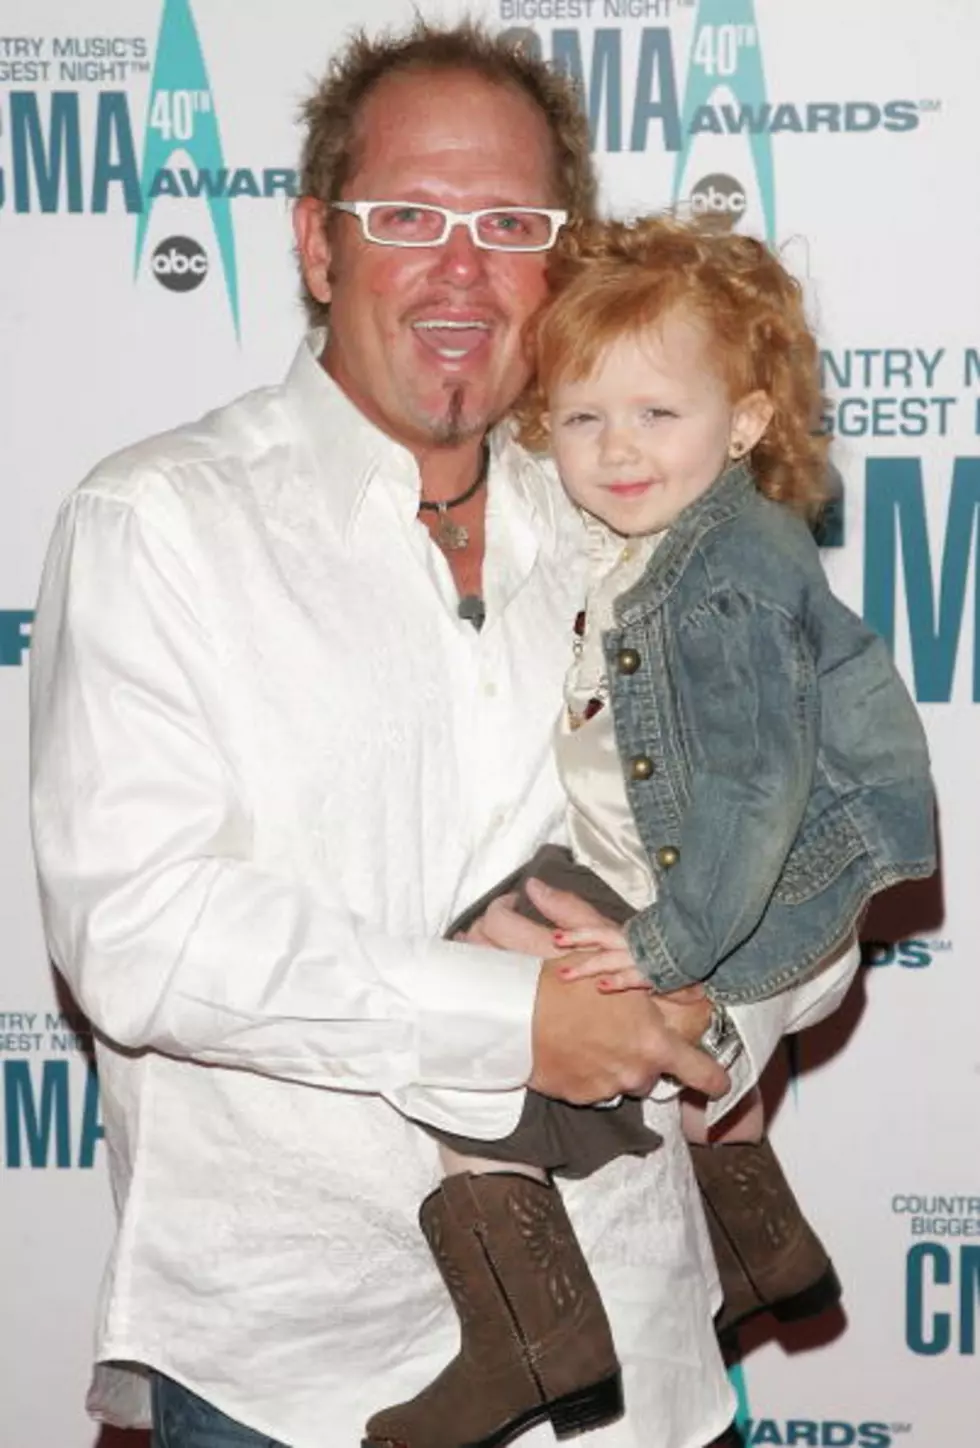 Cledus T. Judd Talks About His Inspiration Behind &#8216;She&#8217;s Going Places&#8217;, The Caylee Anthony Song [VIDEO]